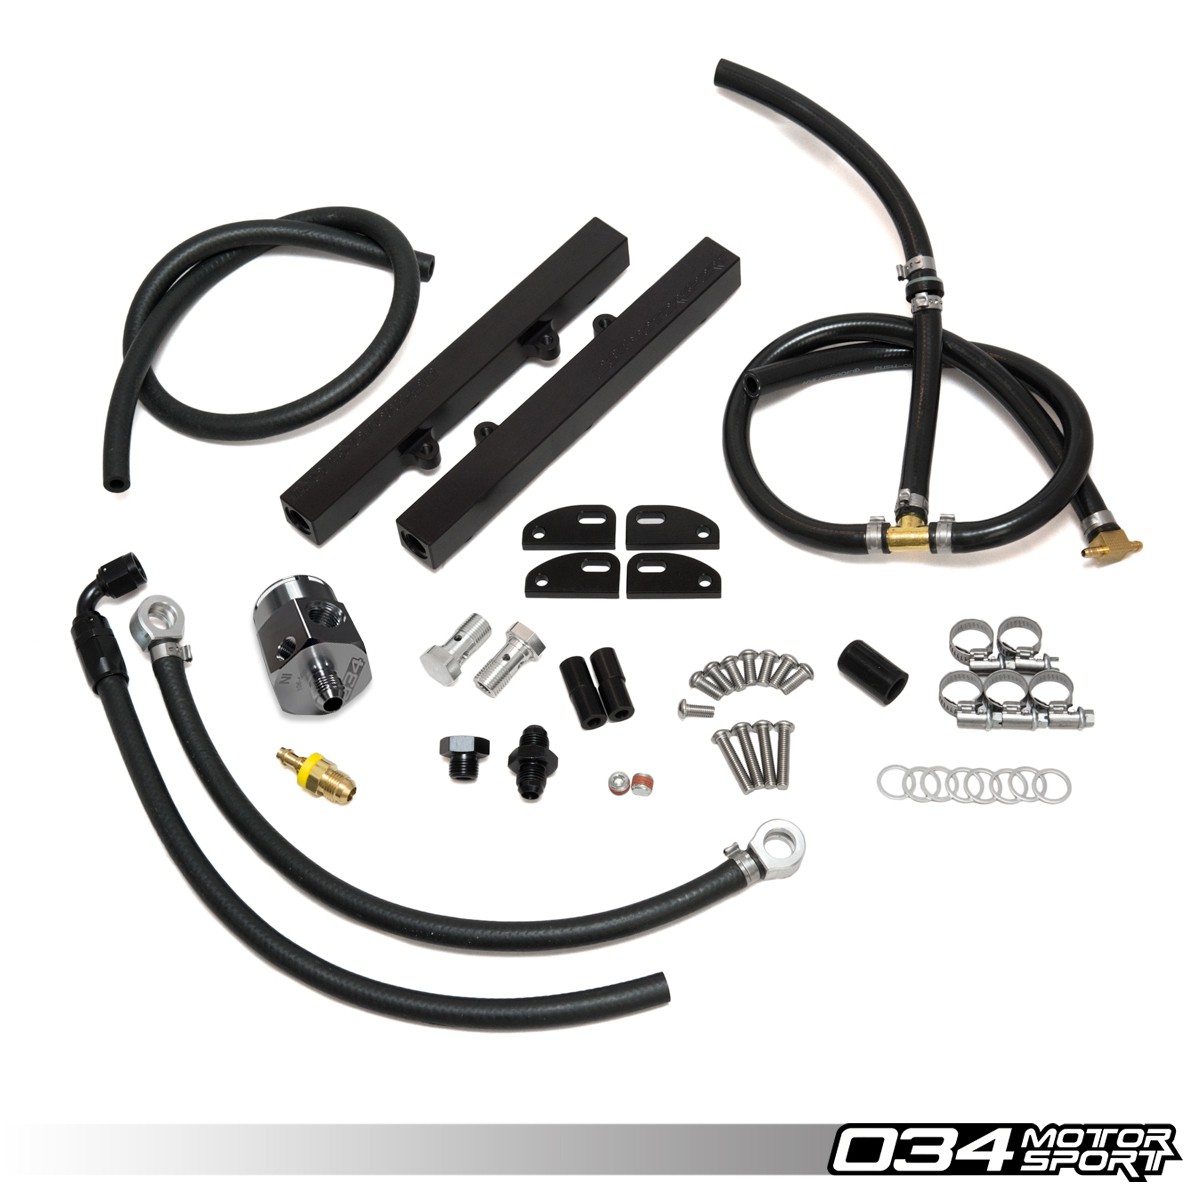 Complete Fuel Rail Kit, 2.7T S4, Drop-In | 034-106-7042-S4